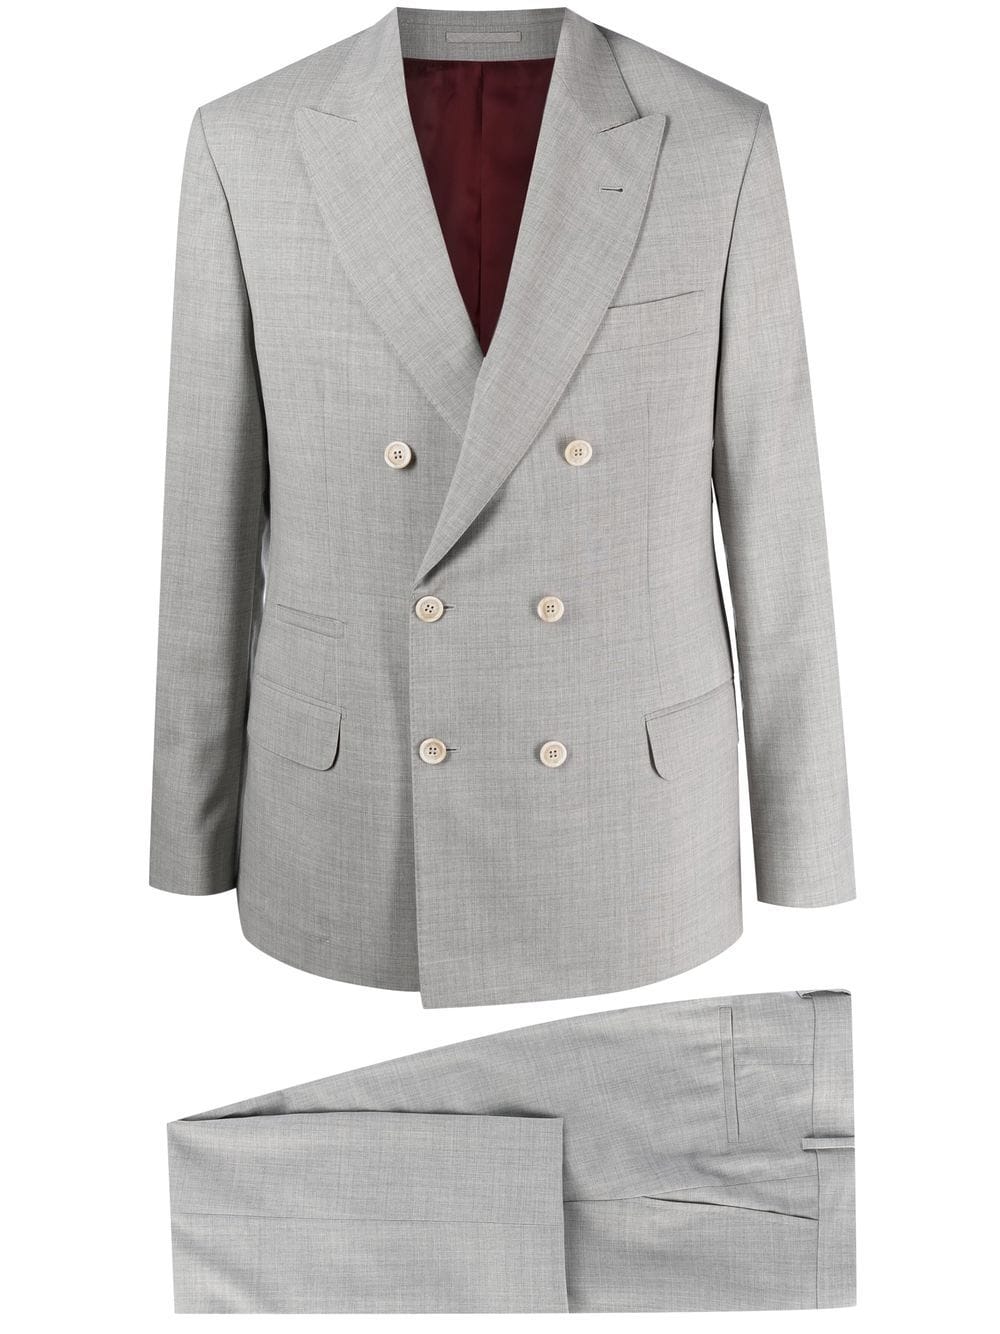 Pearl gray double-breasted suit